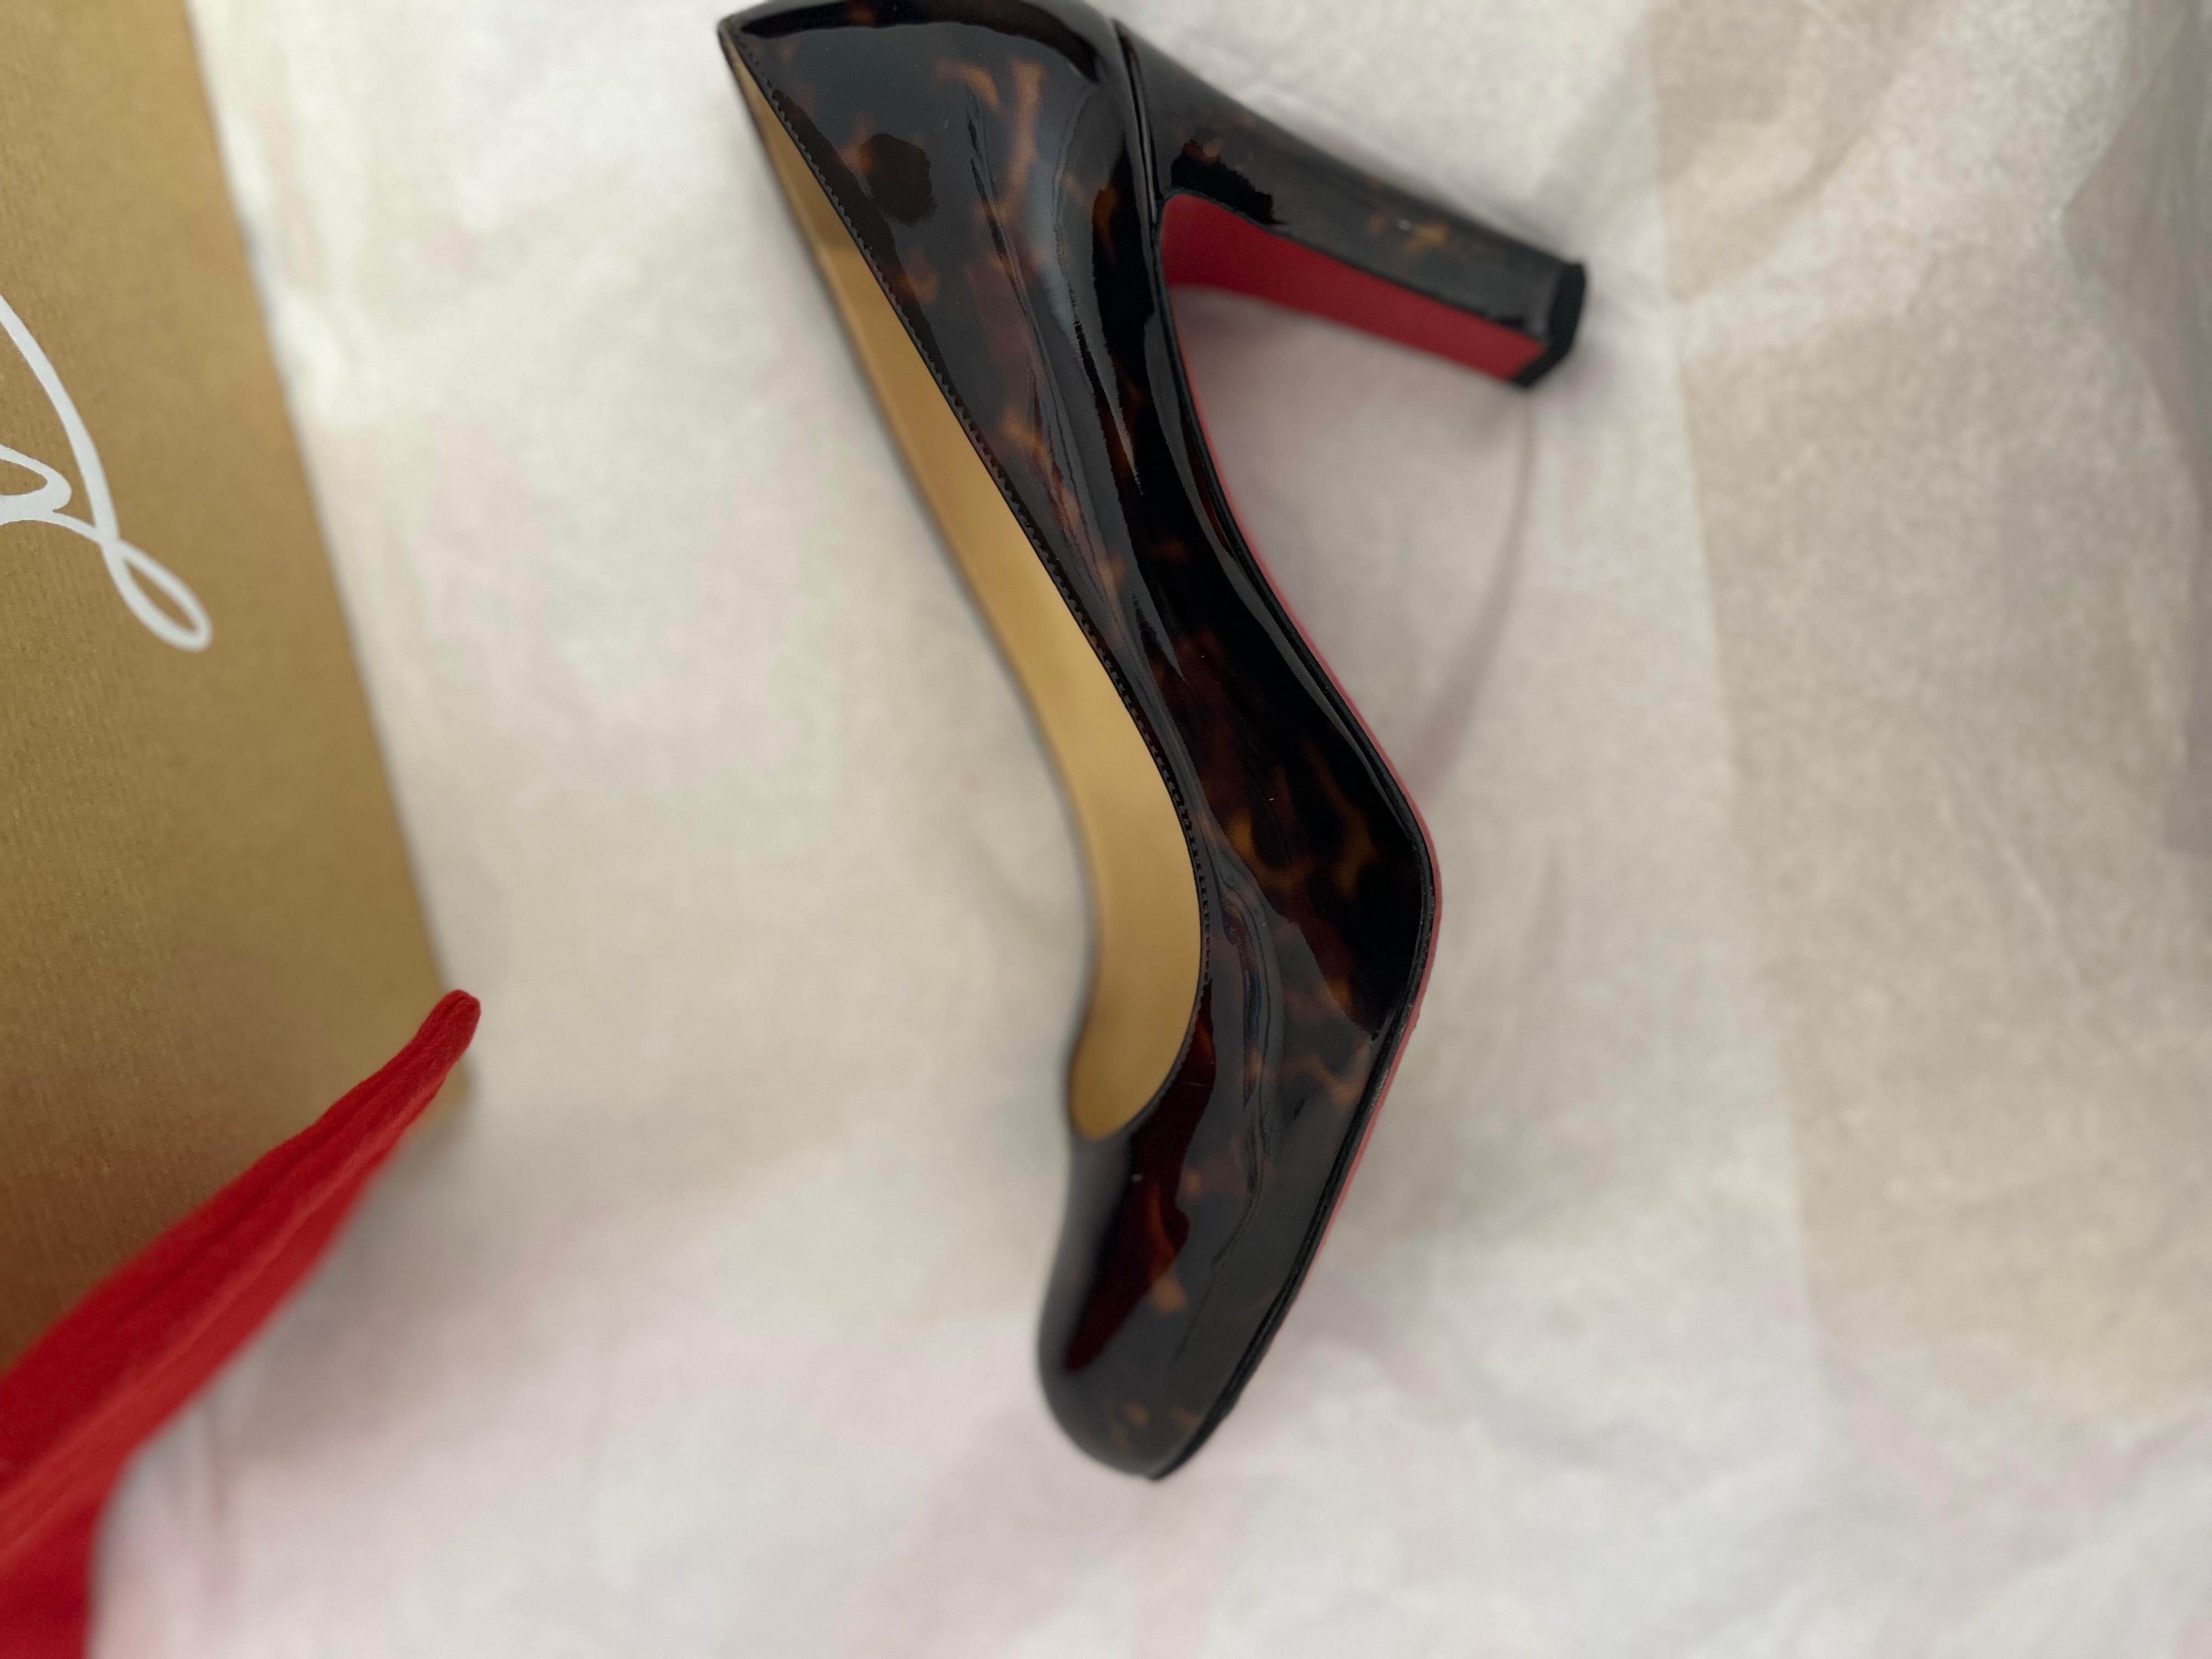 This pumps have a classic tortoise shell leather and go by the name of Miss Tack 85. They are a classic pump and make a great addition to any wardrobe.
The chunky heel is a manageable 3.5